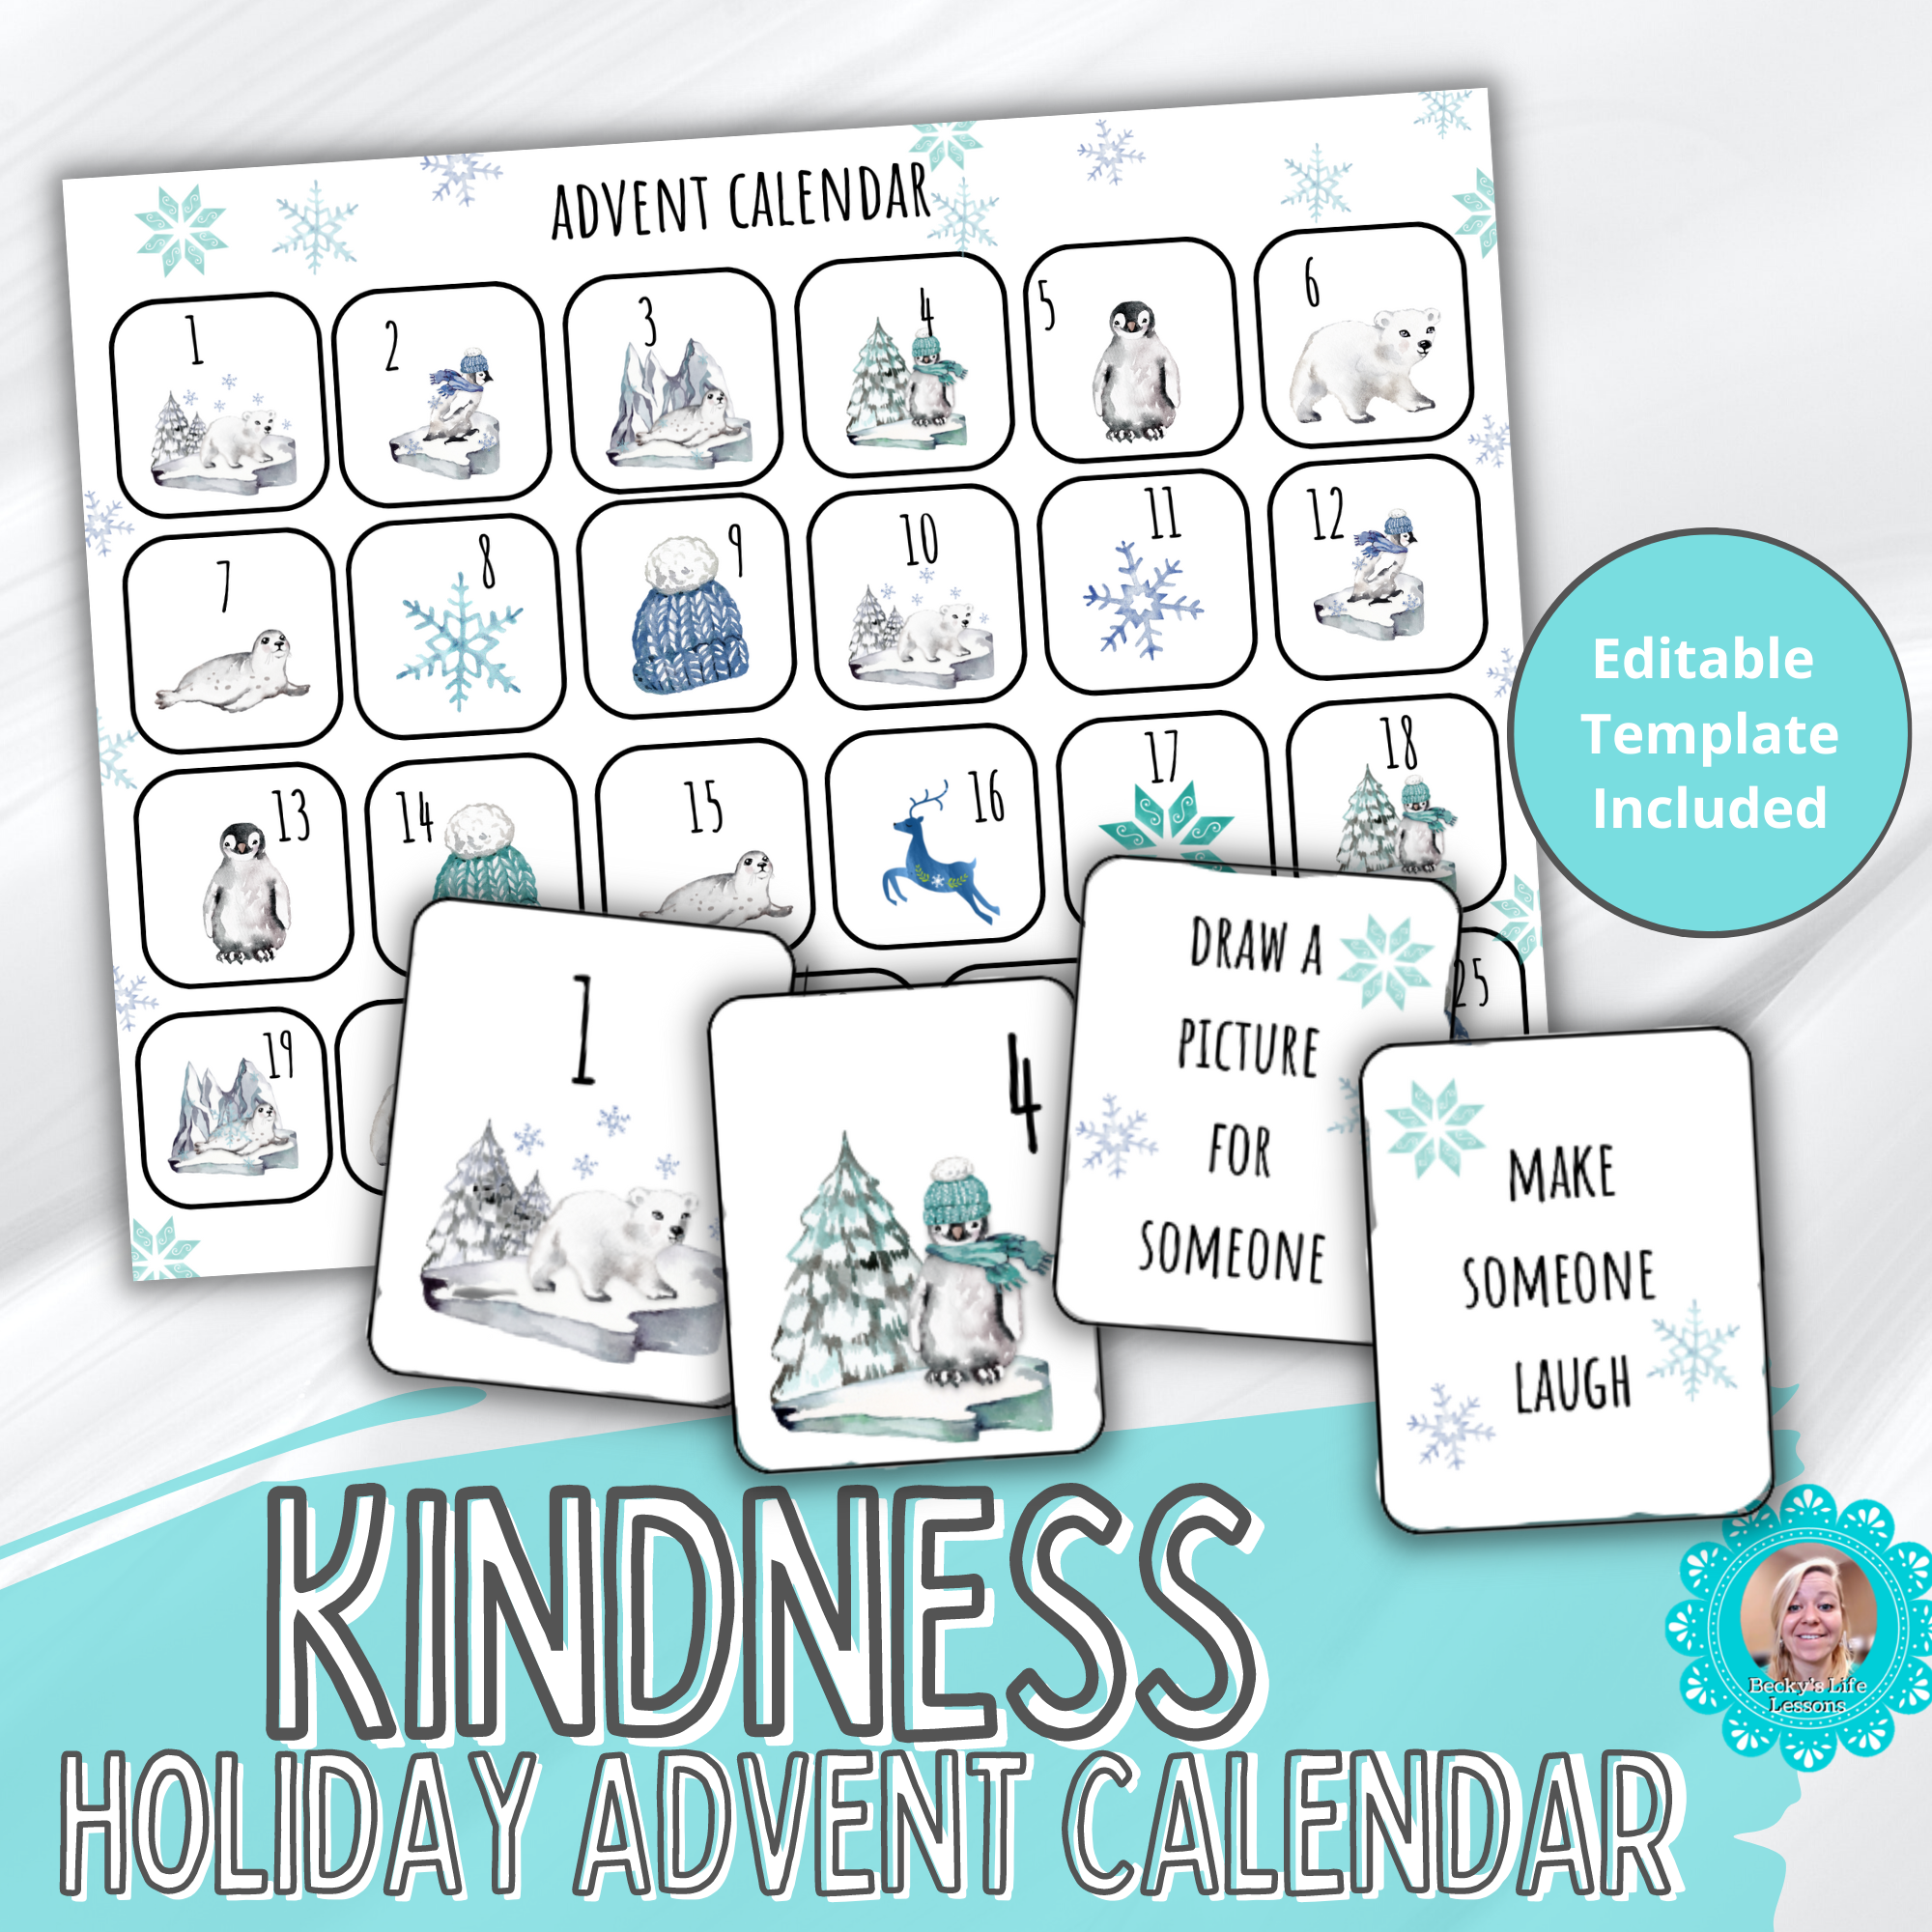 Christmas Kindness Countdown: An Advent Calendar for Your Classroom's featured image